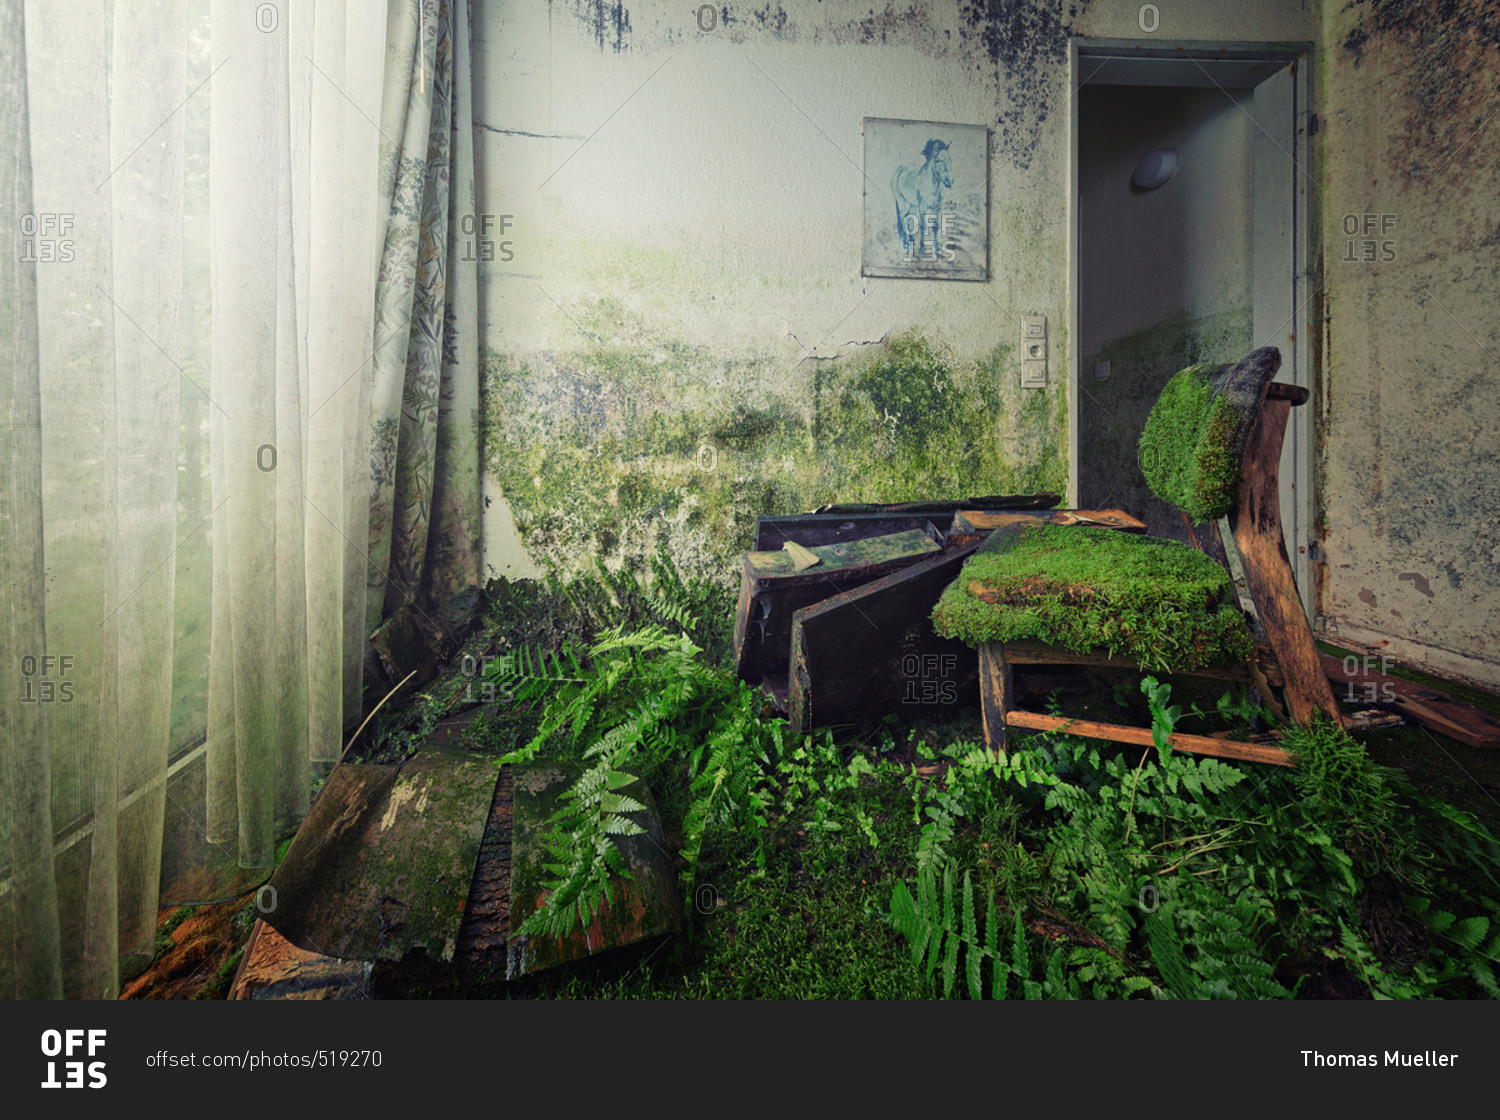 Moss covered chair in abandoned house with ferns growing from the floor